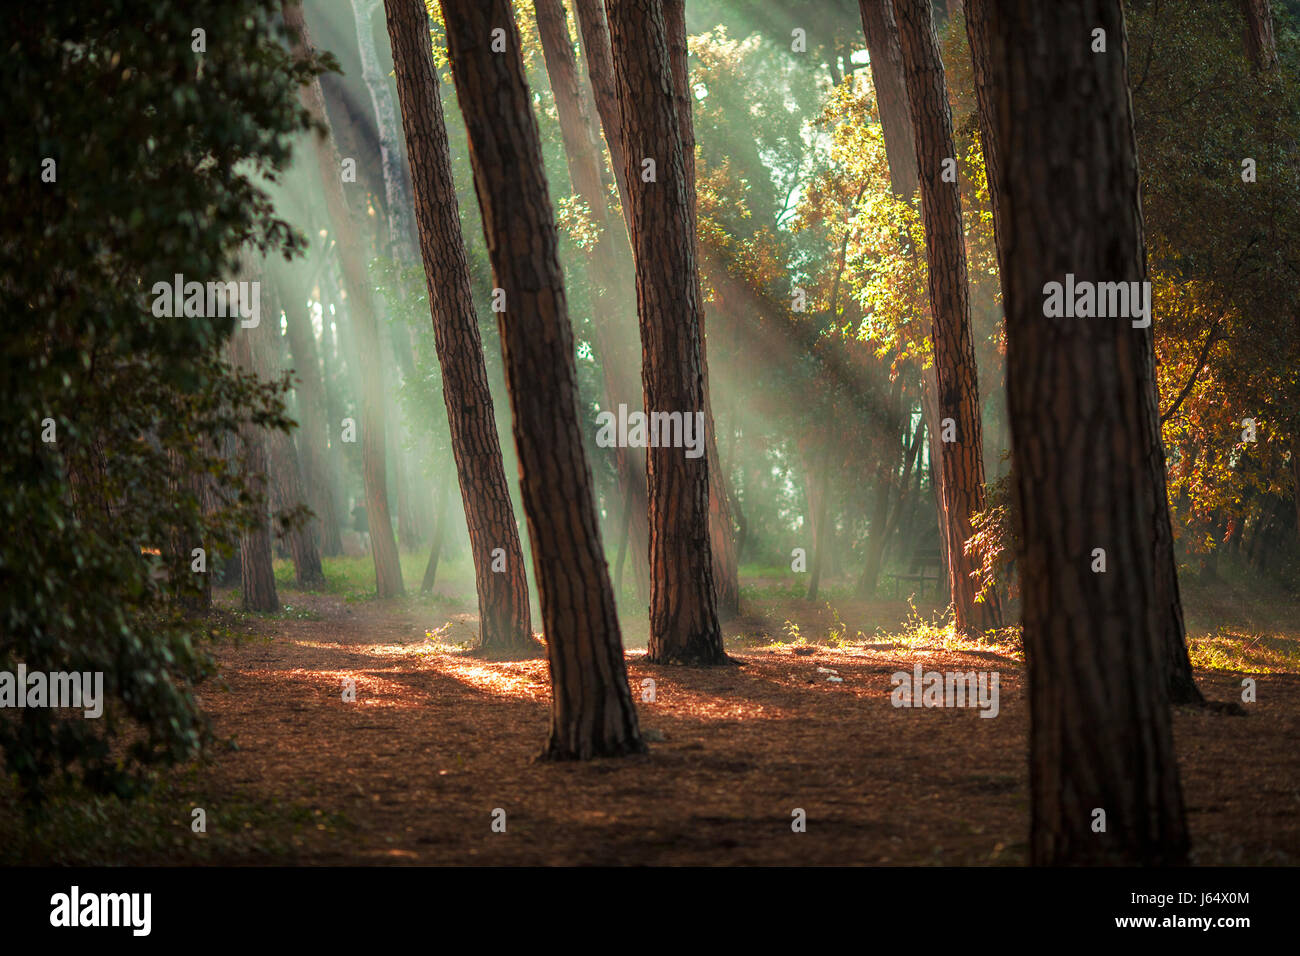 Picture of a pine wood with golden light creating a beautiful calm feeling. Stock Photo